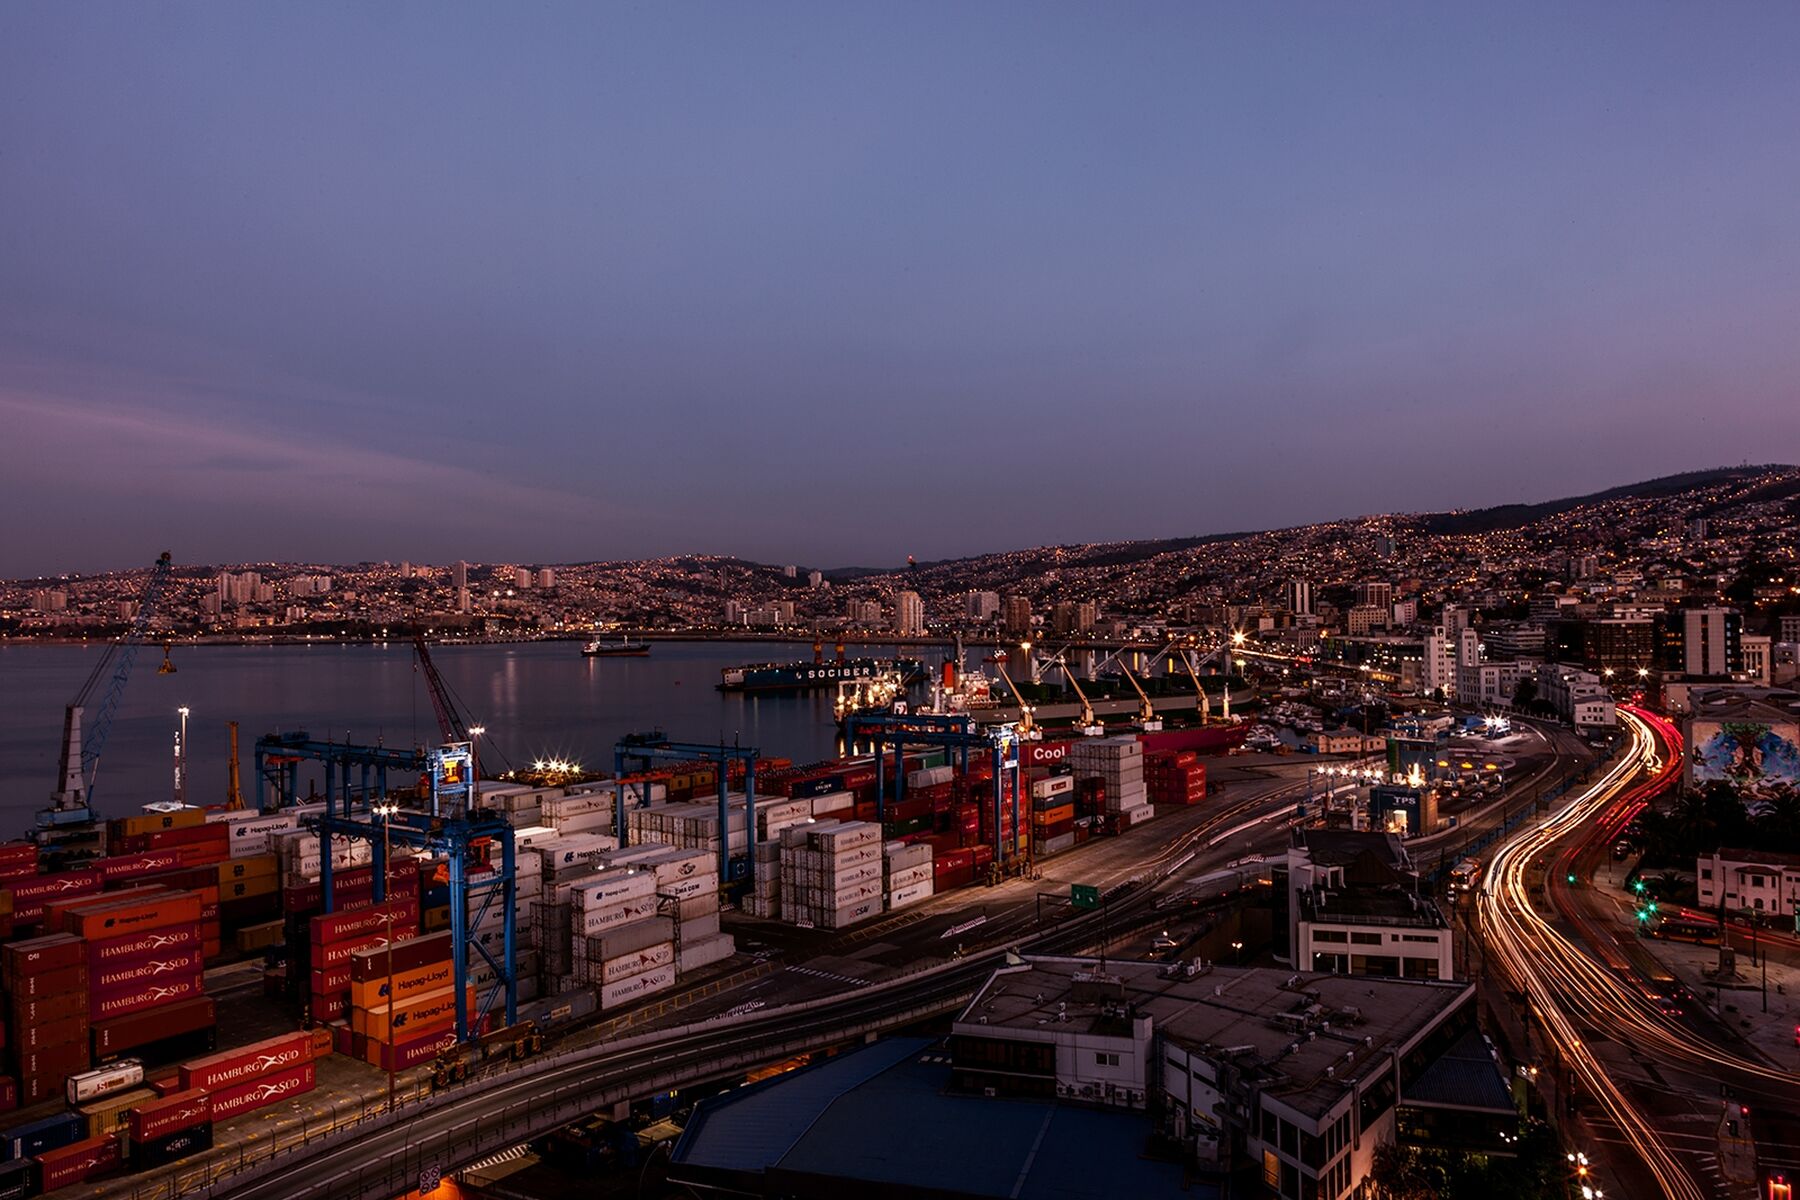 A nighttime view of the port city of Valparaíso, Chile